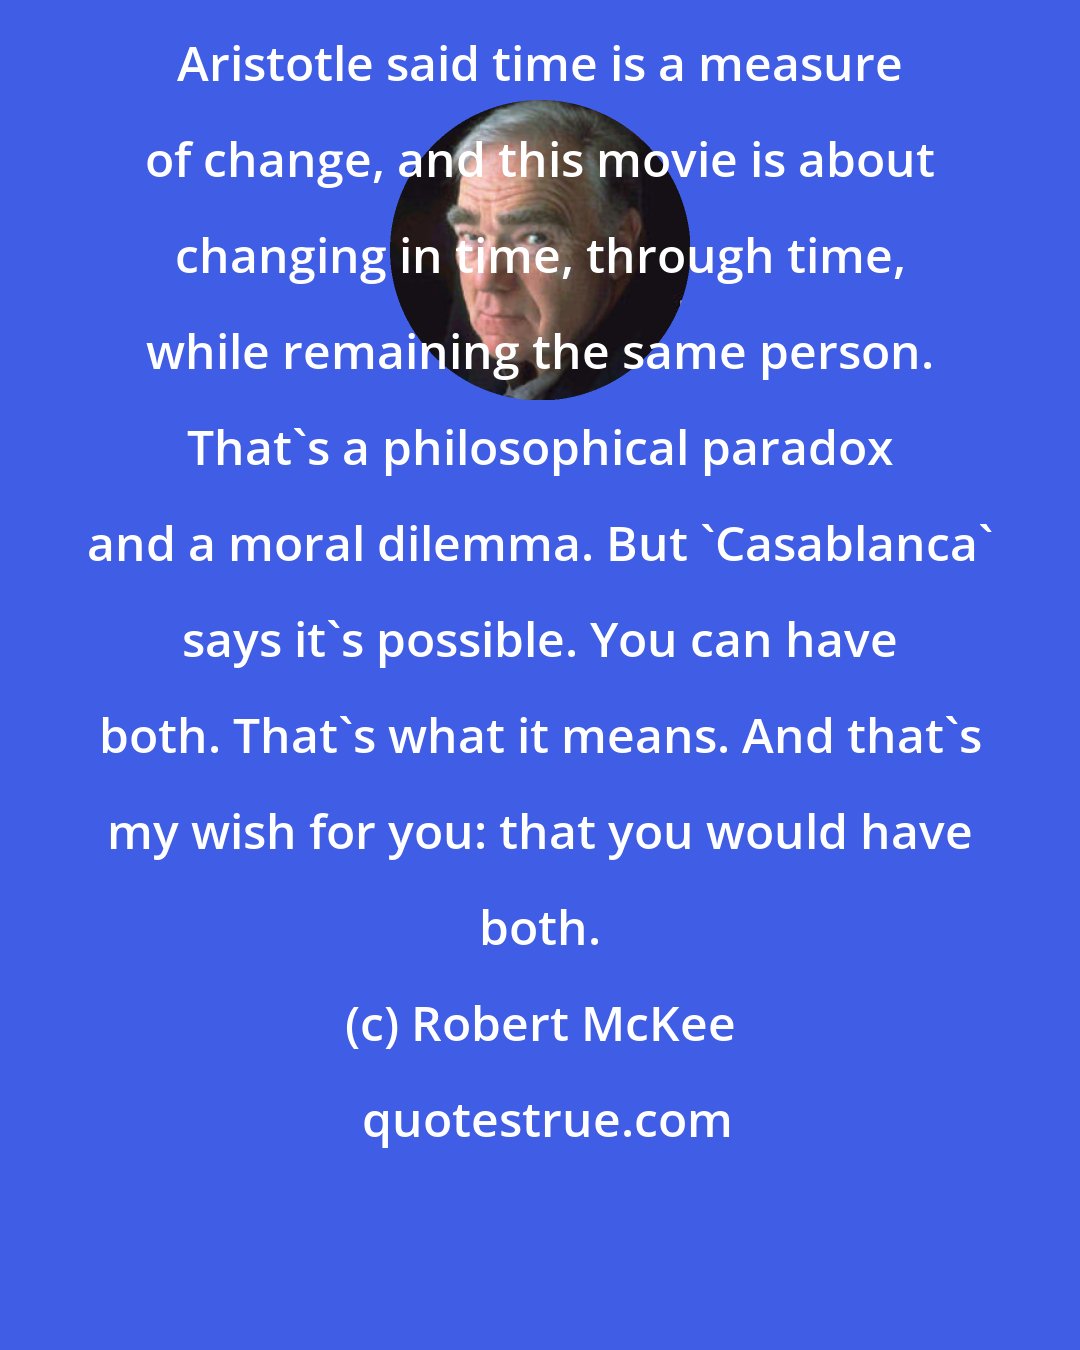 Robert McKee: Aristotle said time is a measure of change, and this movie is about changing in time, through time, while remaining the same person. That's a philosophical paradox and a moral dilemma. But 'Casablanca' says it's possible. You can have both. That's what it means. And that's my wish for you: that you would have both.